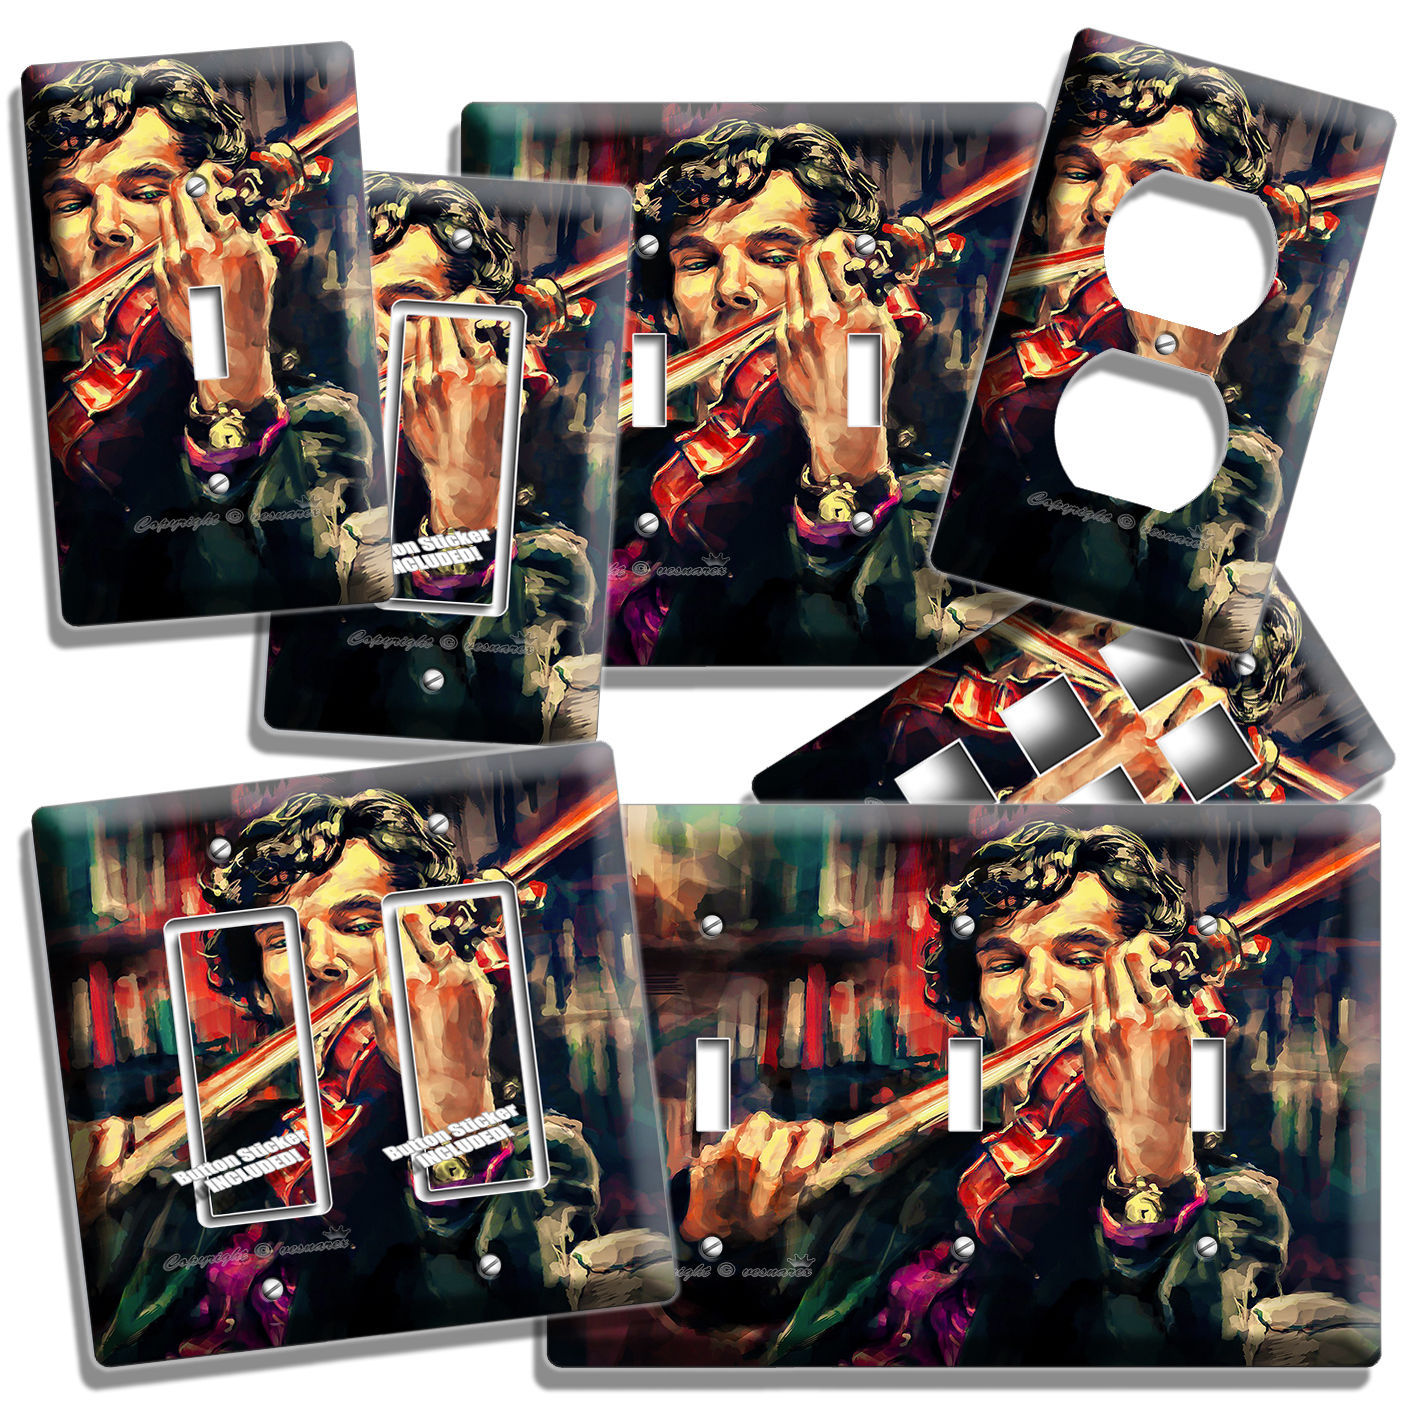 SHERLOCK HOLMES VIOLIN BENEDICT CUMBERBATCH LIGHT SWITCH OUTLET WALL ROOM DECOR - $16.73 - $27.89